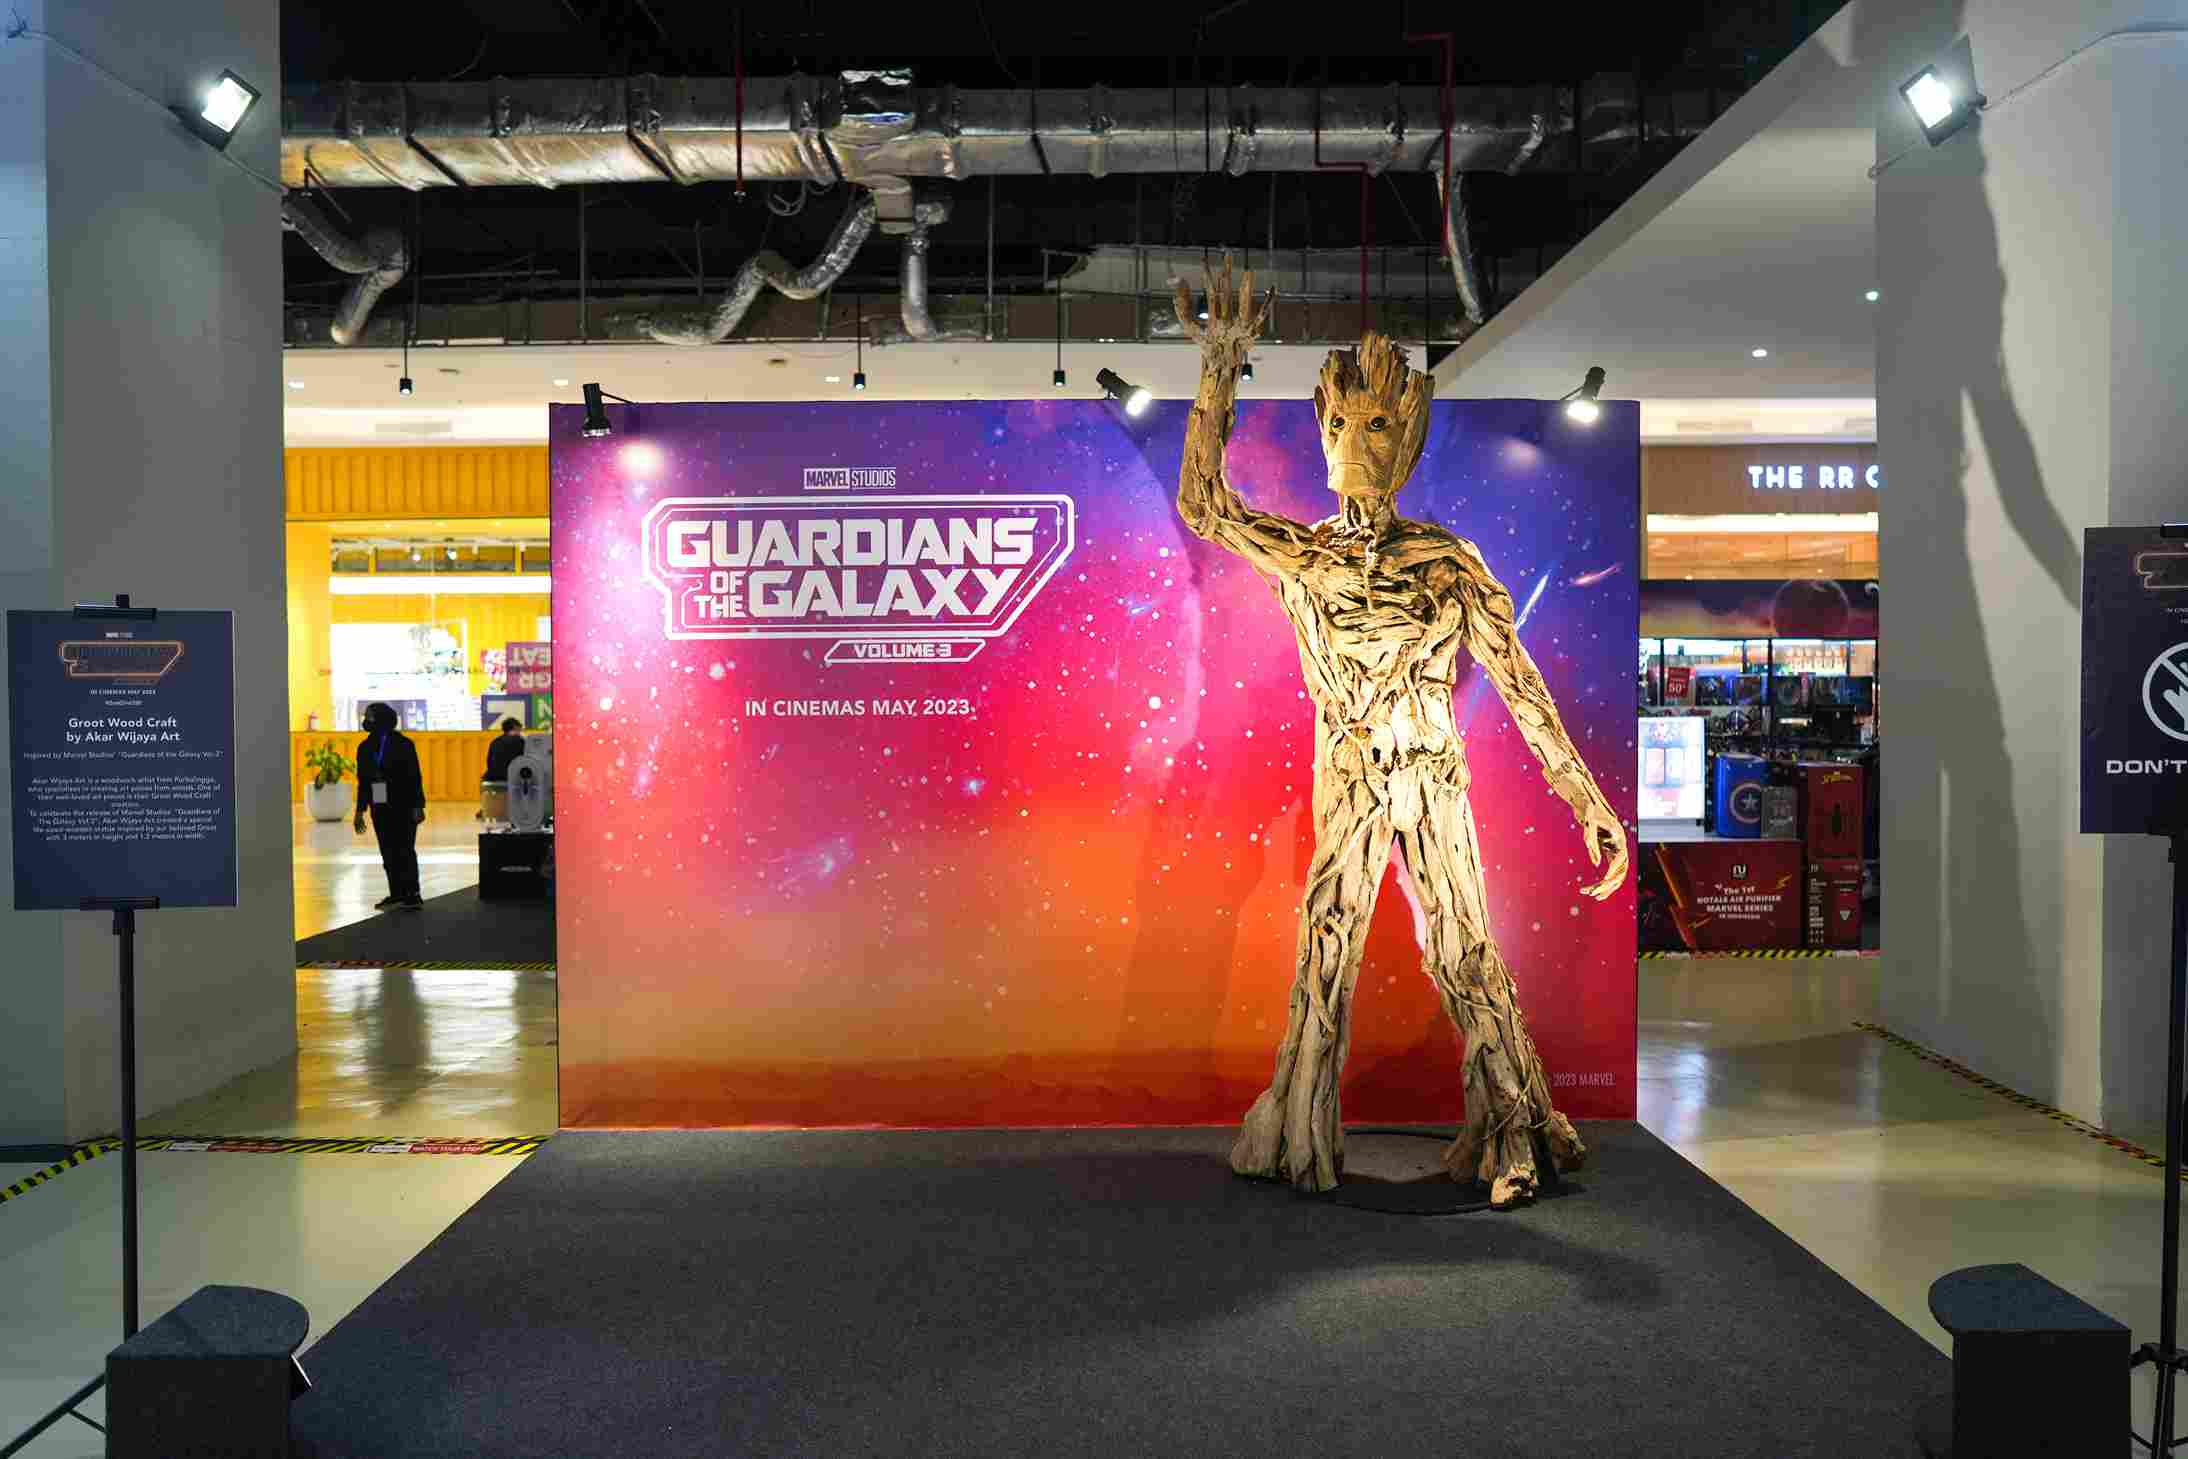 Mall Exhibition Guardians of The Galaxy Vol.3. Marvel. Disney. Mall of Indonesia. Patung Groot.